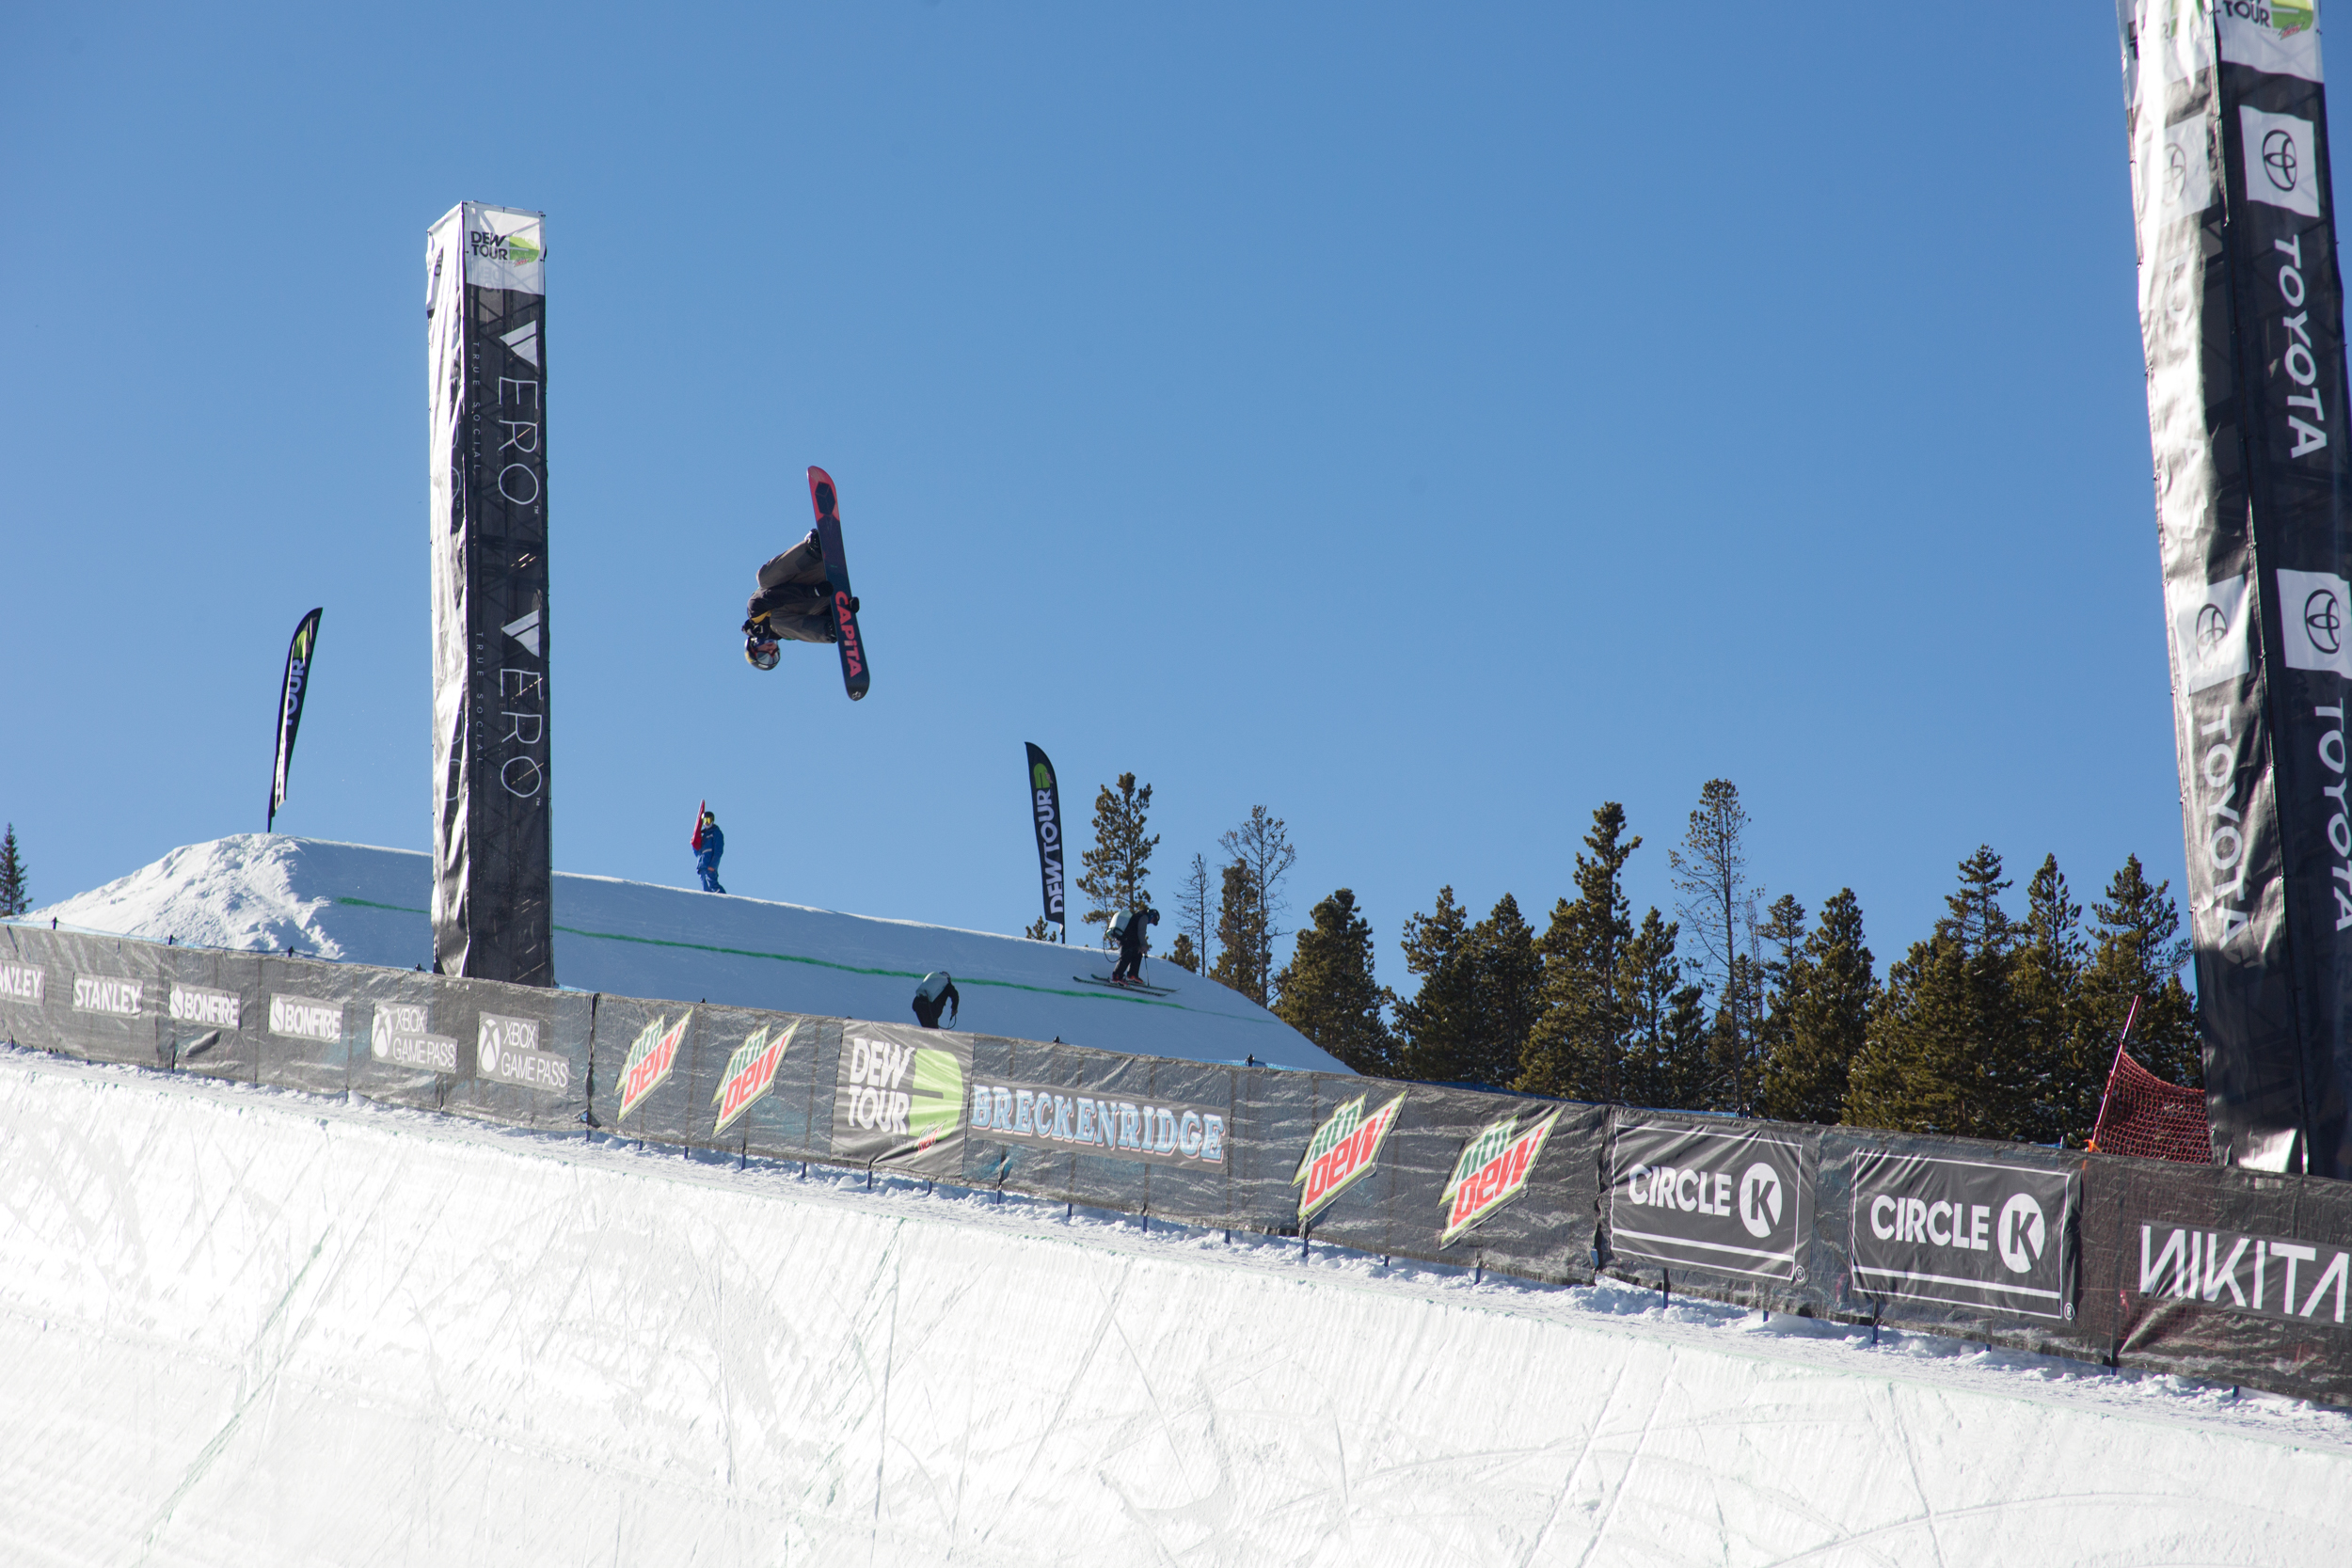 Chase Josey_SNB_TEAM_PIPE_DEWTOUR_BRECK_HUNTER MURPHY